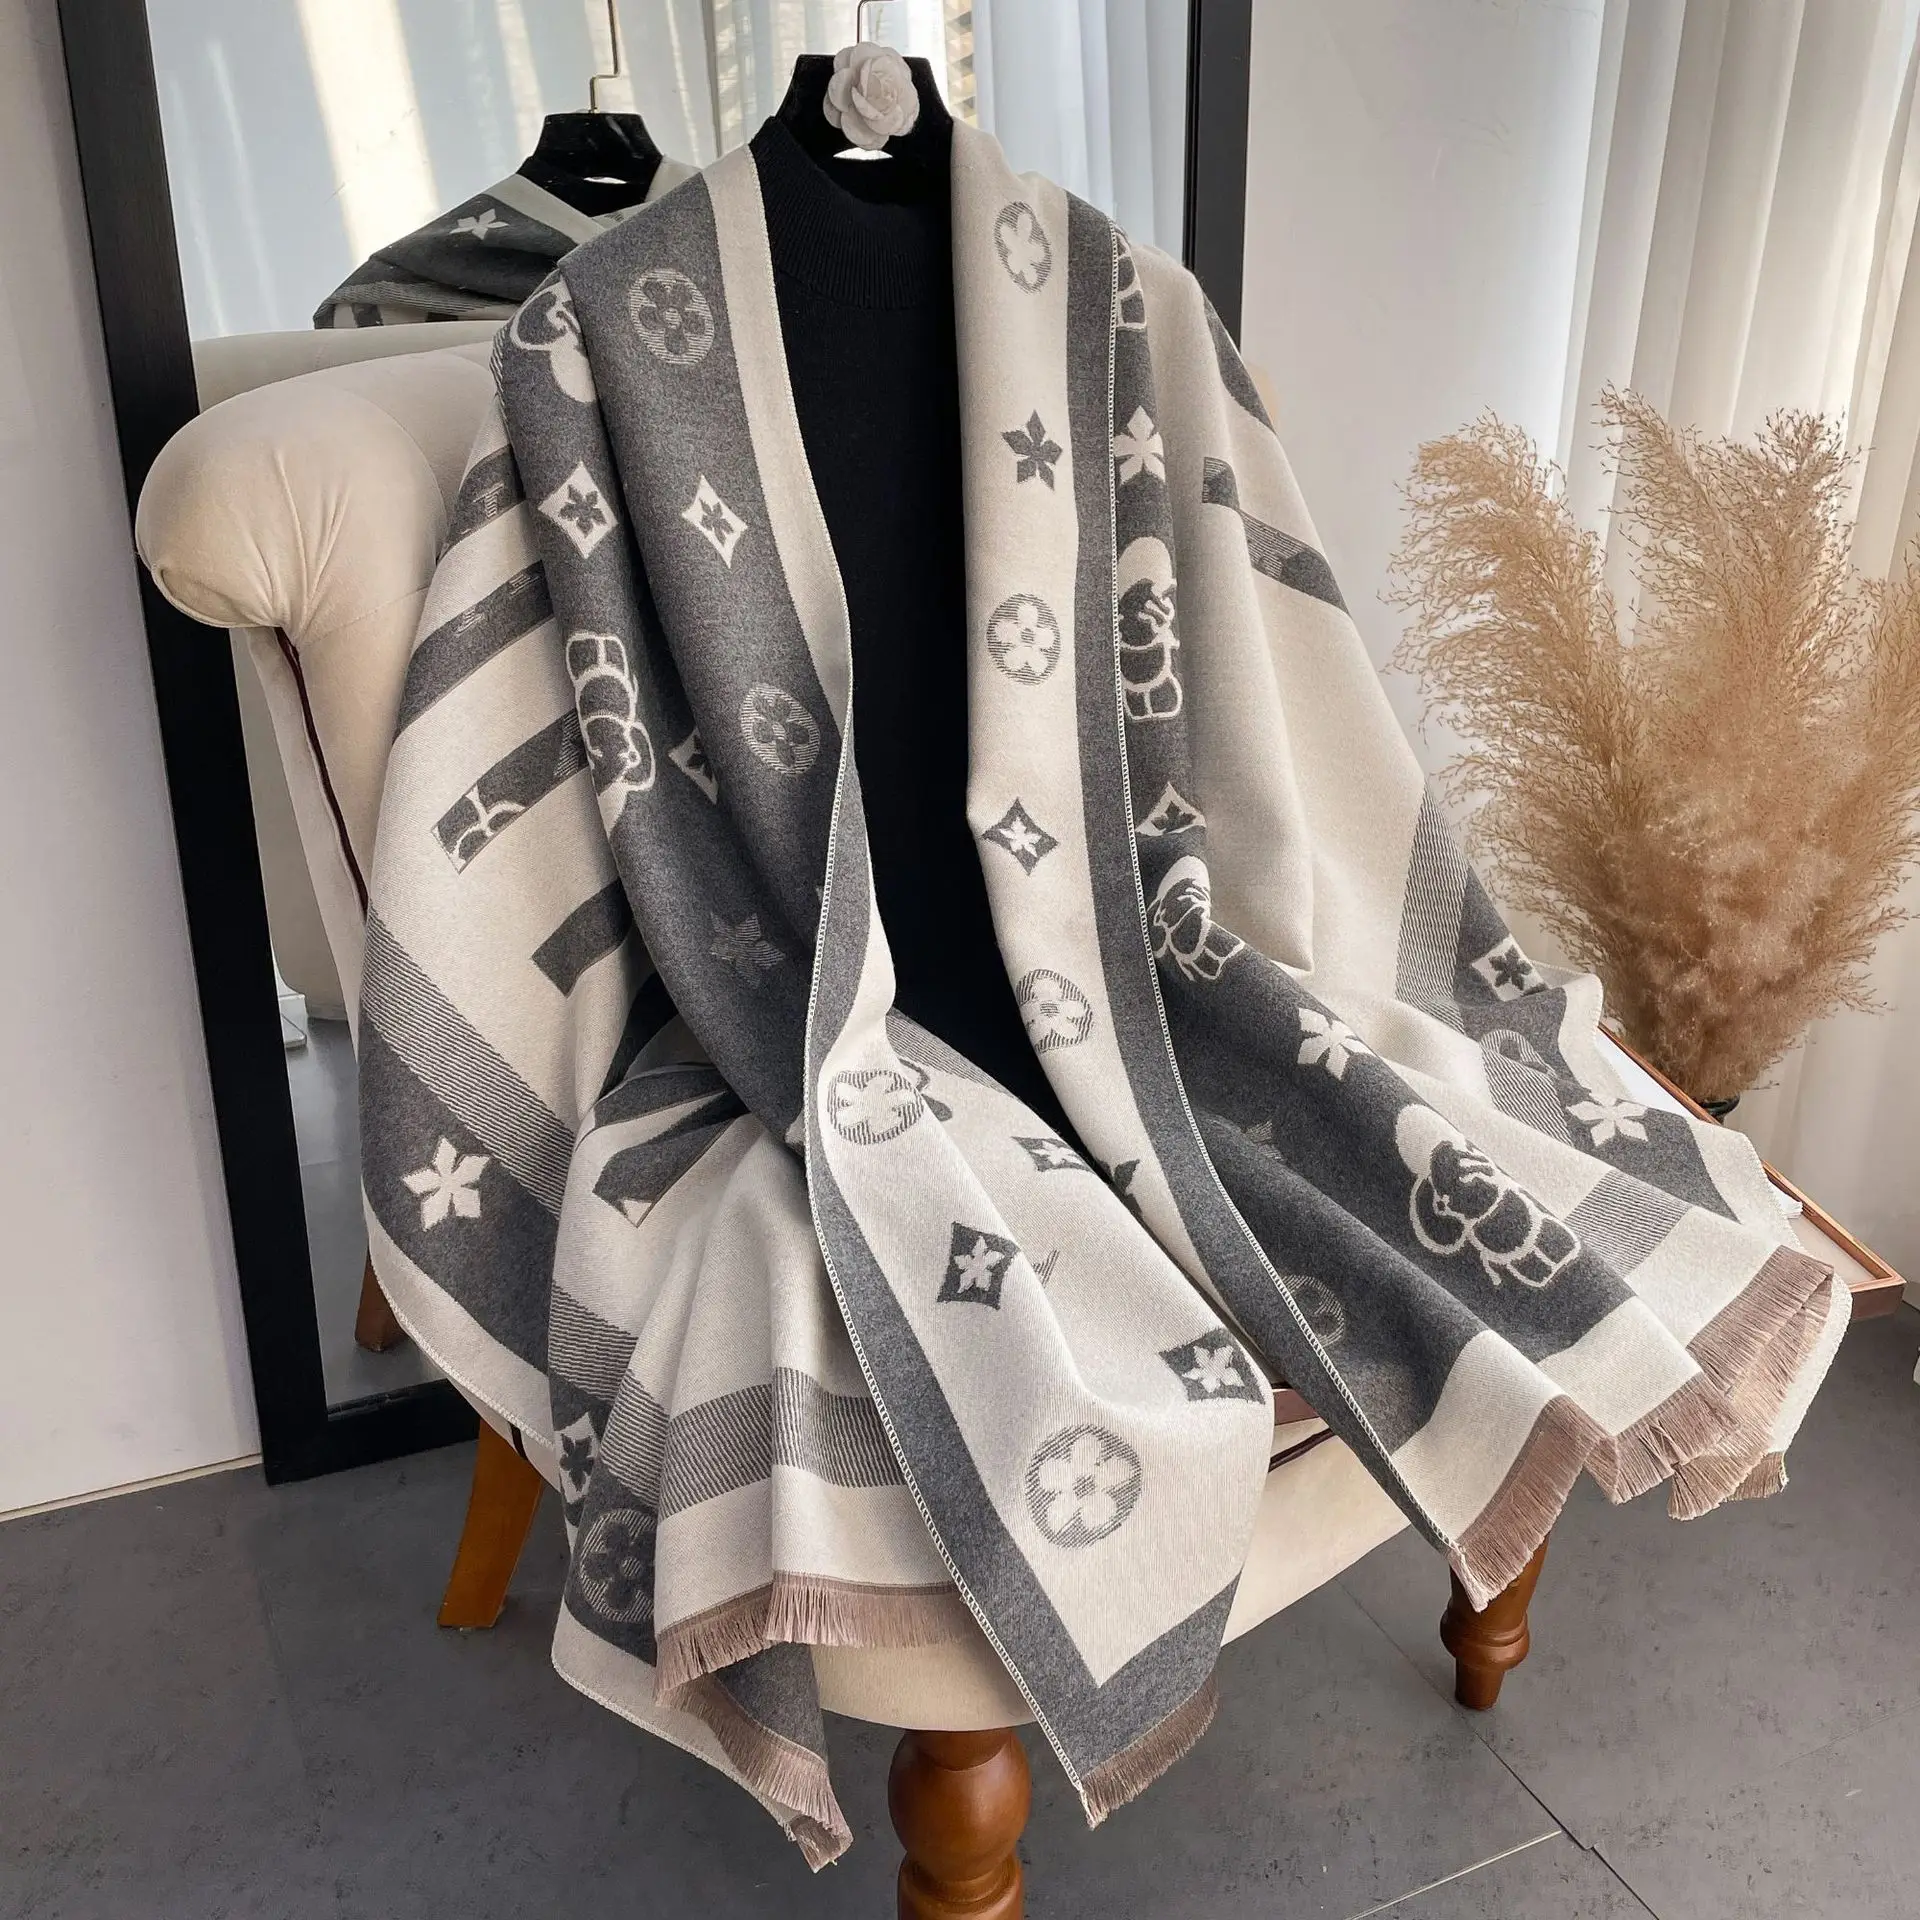 Wholesale High Quality New Fashion Winter Warm Thick Scarves Women Luxury  Designer Brand Cashmere Scarf Pashmina Shawl Double Sided Stoles From  m.